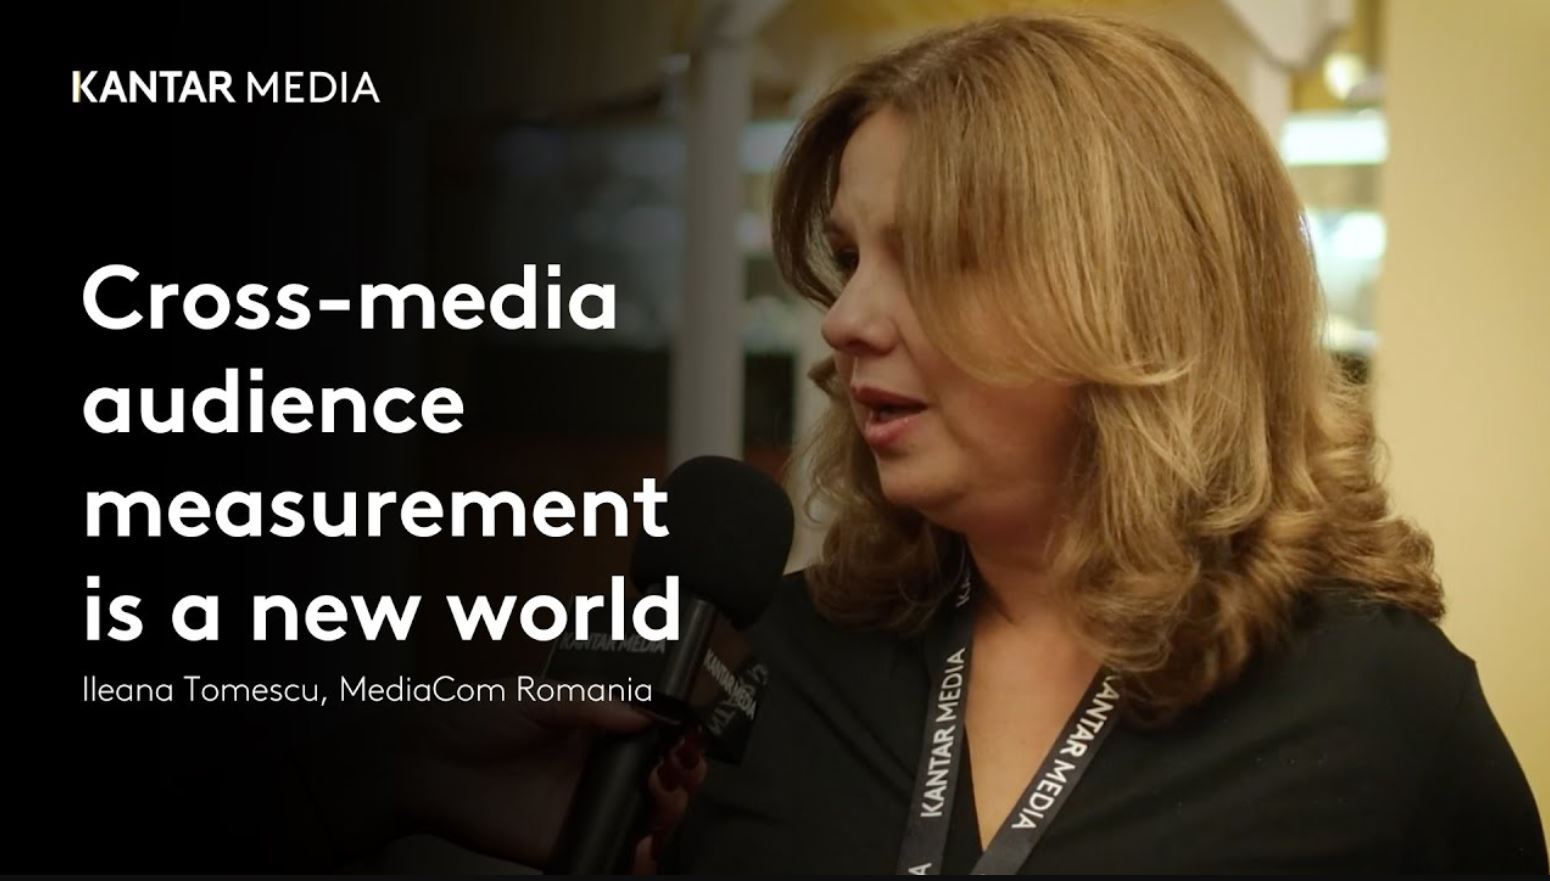 Cross-media audience measurement is a new world